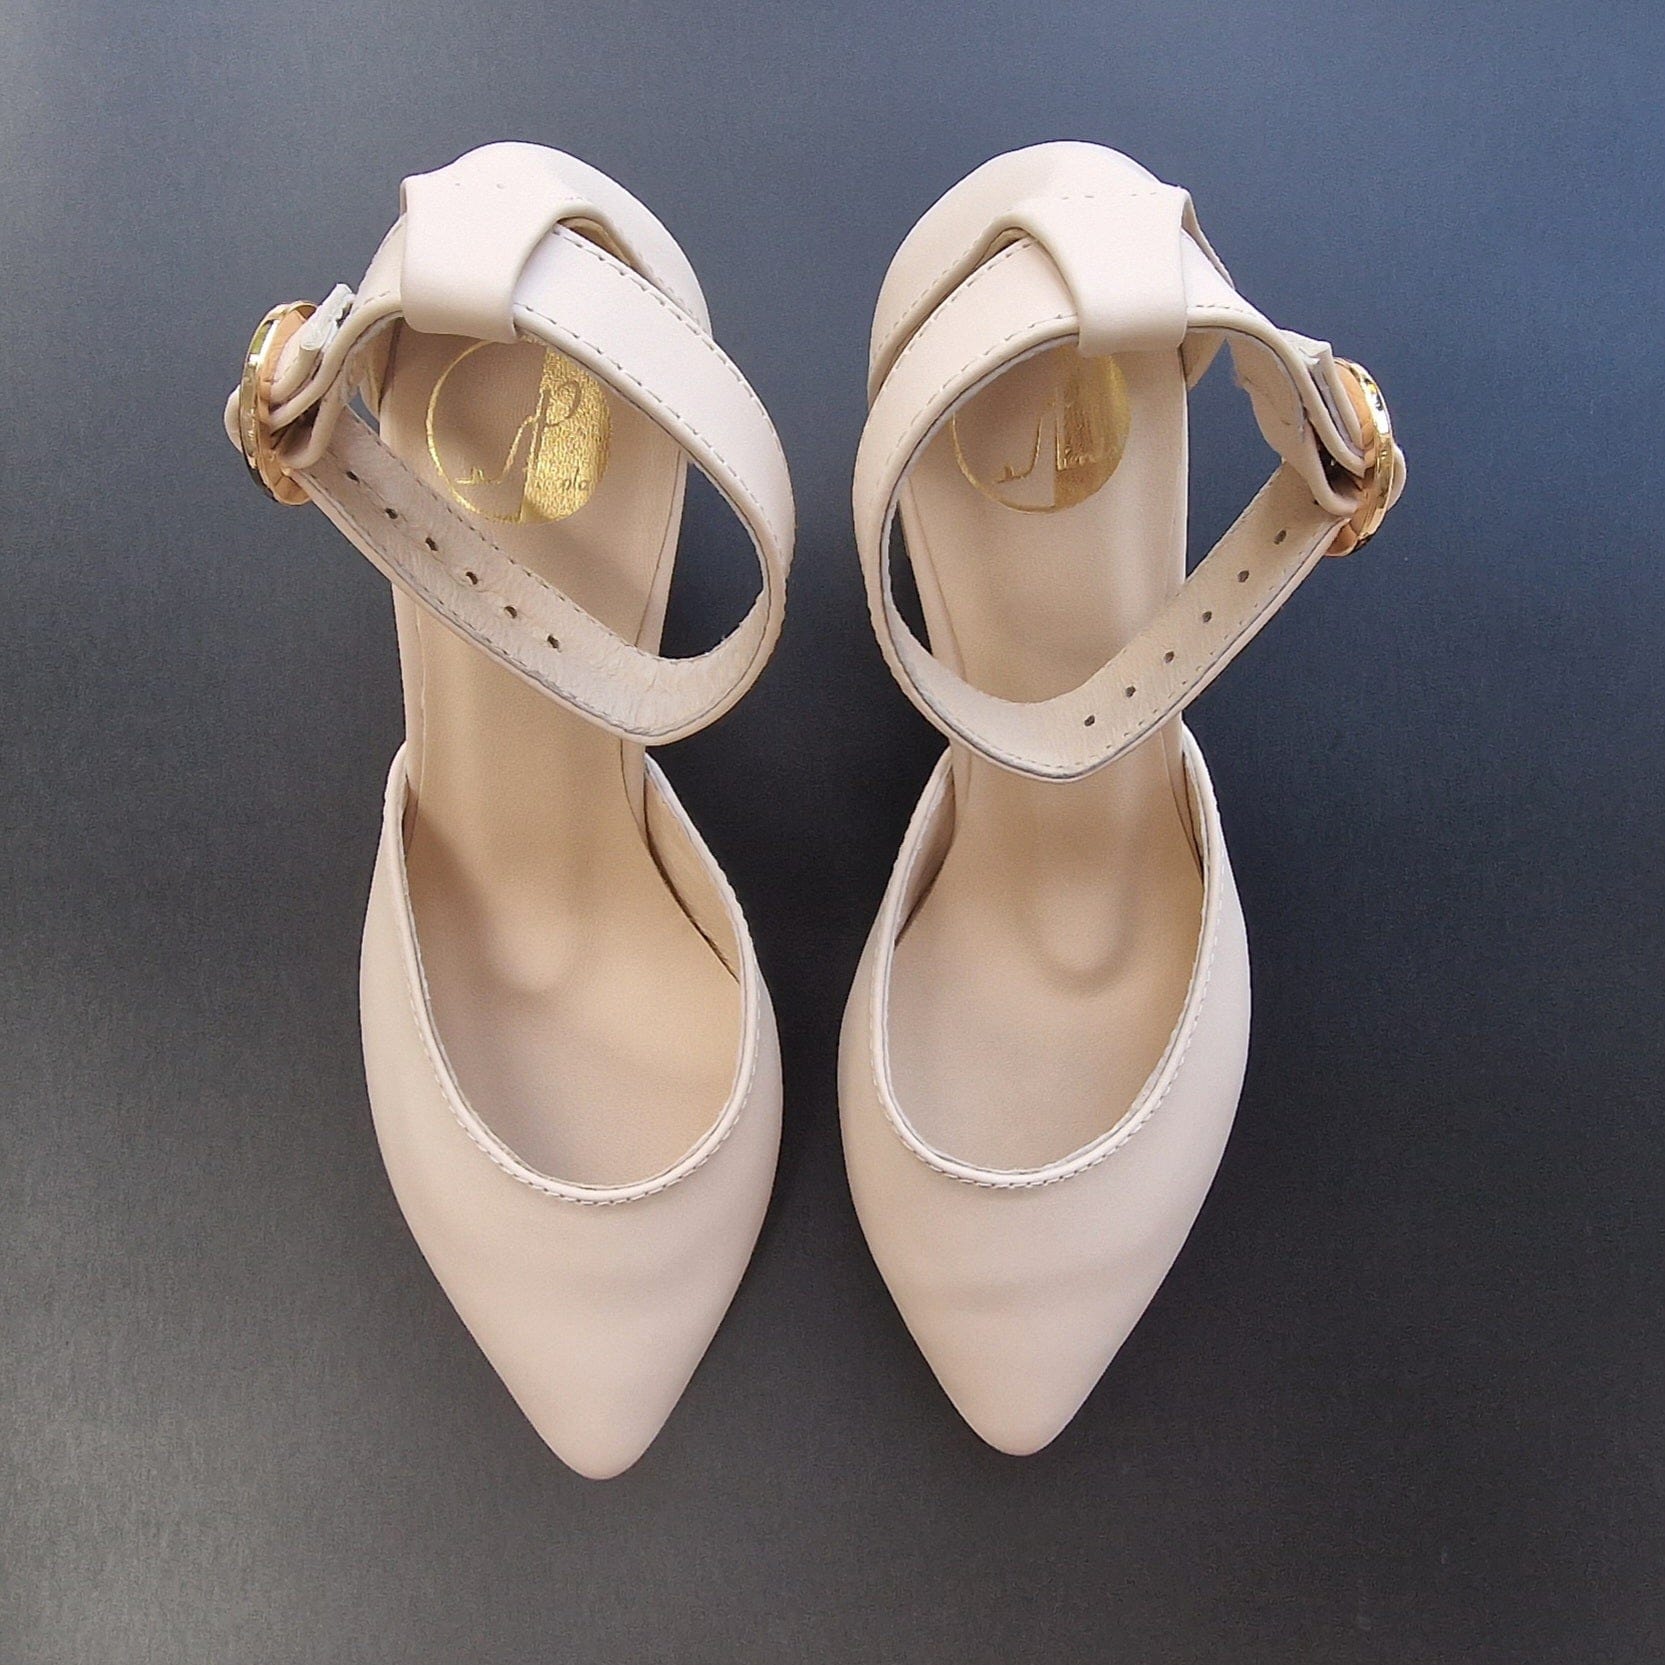 Pointed toe court shoes with an ankle strap in nude leather